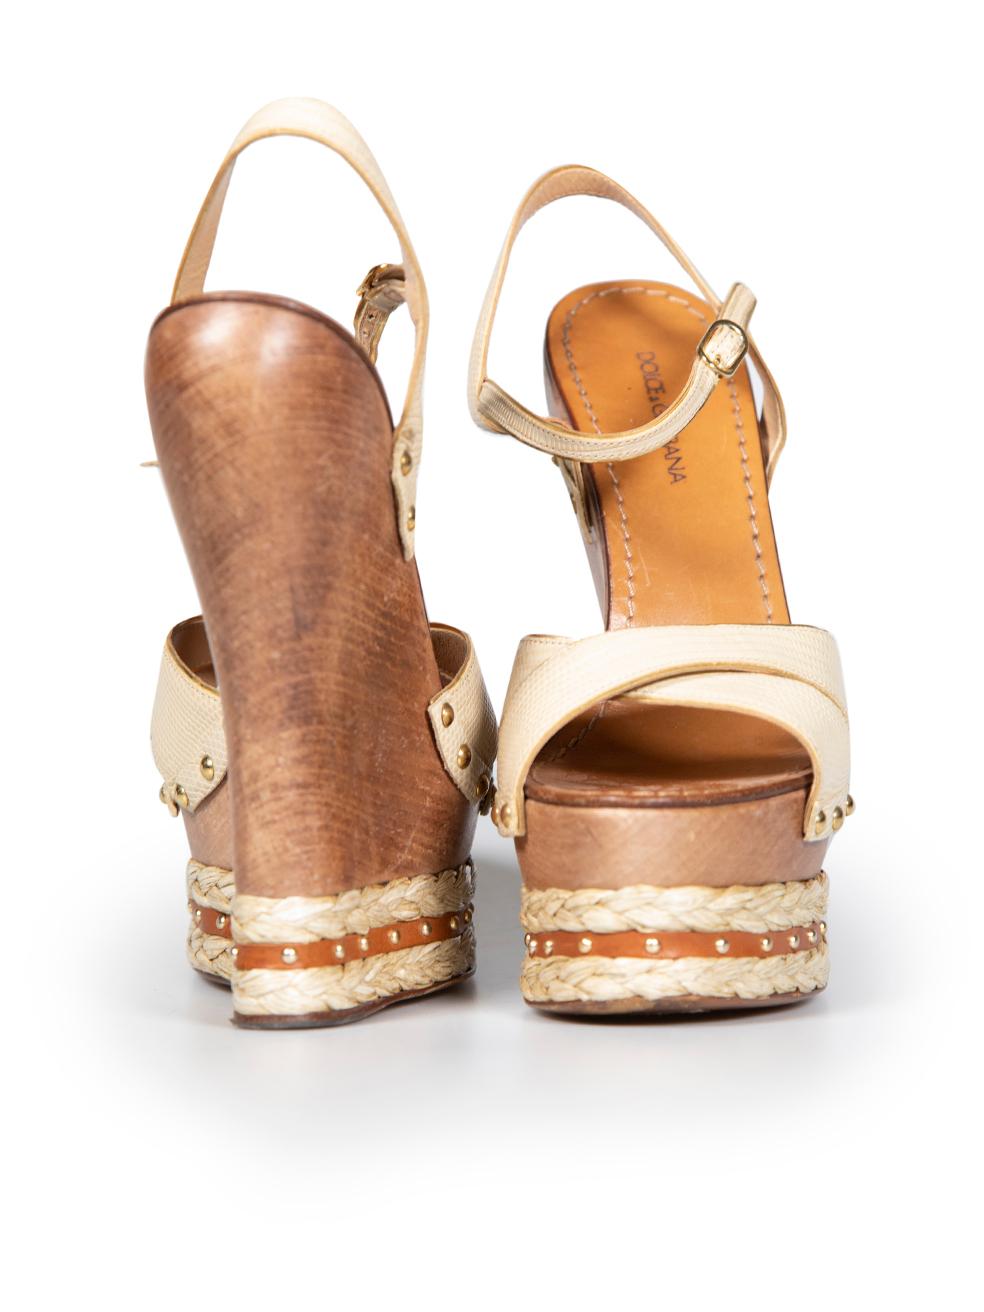 Dolce & Gabbana Beige Leather Lizard Embossed Wedges Size IT 40 In Good Condition For Sale In London, GB